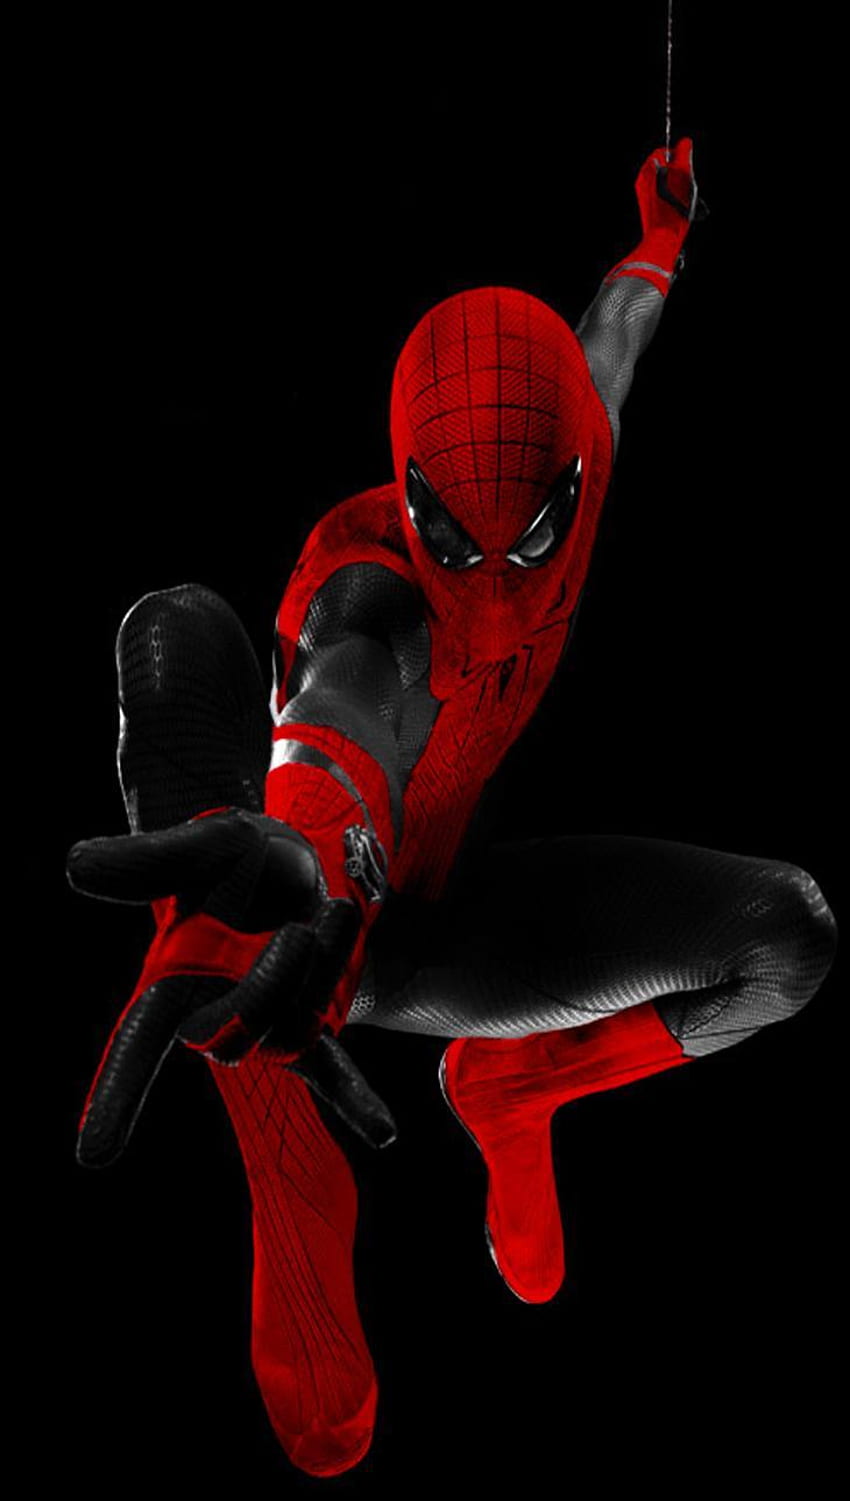 Spiderman 3D Untuk Android. Android 3D, Android Spider-Man wallpaper ponsel HD